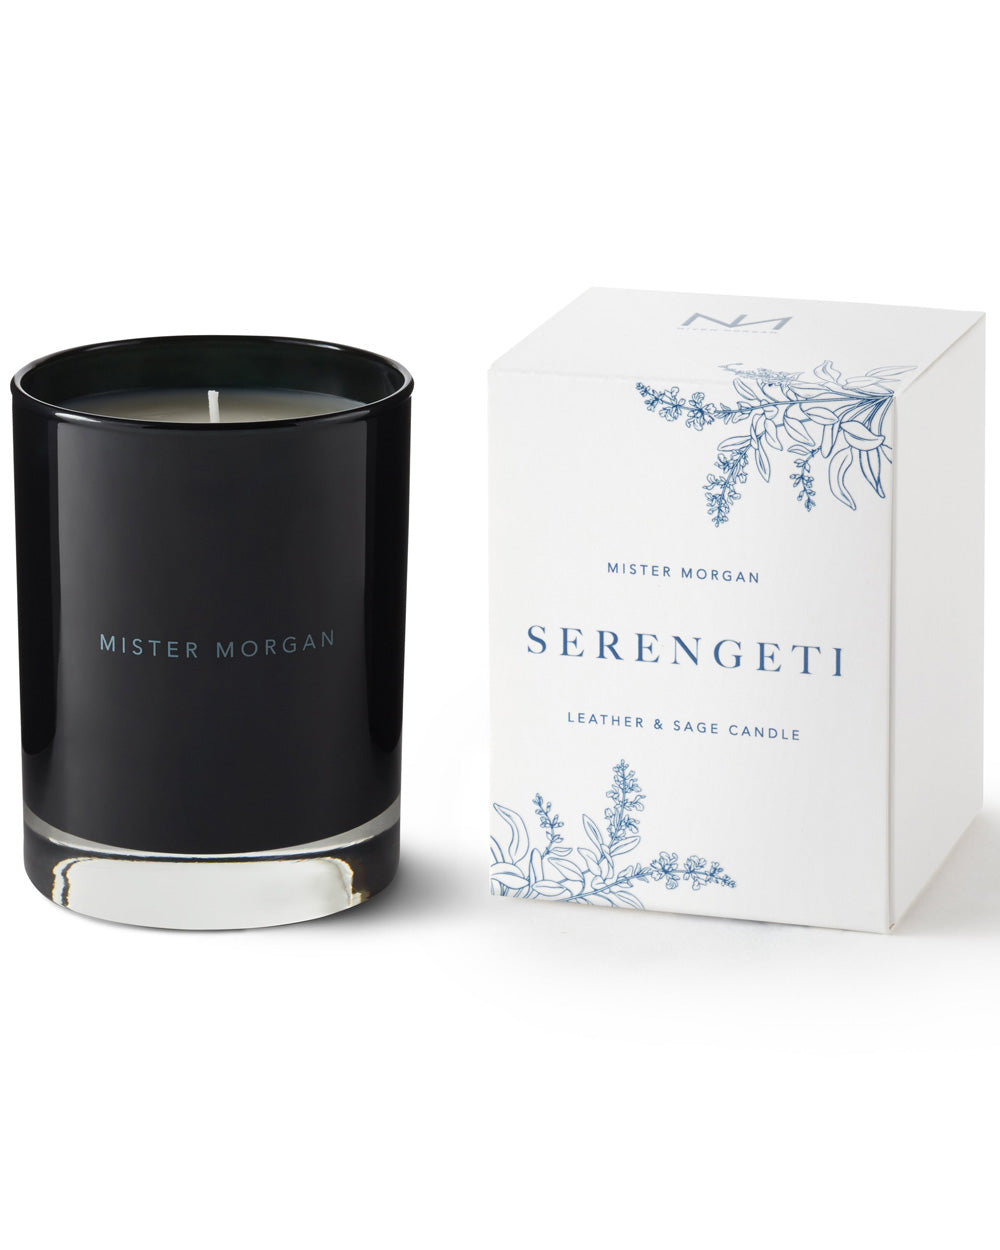 Serengeti Leather and Sage Candle